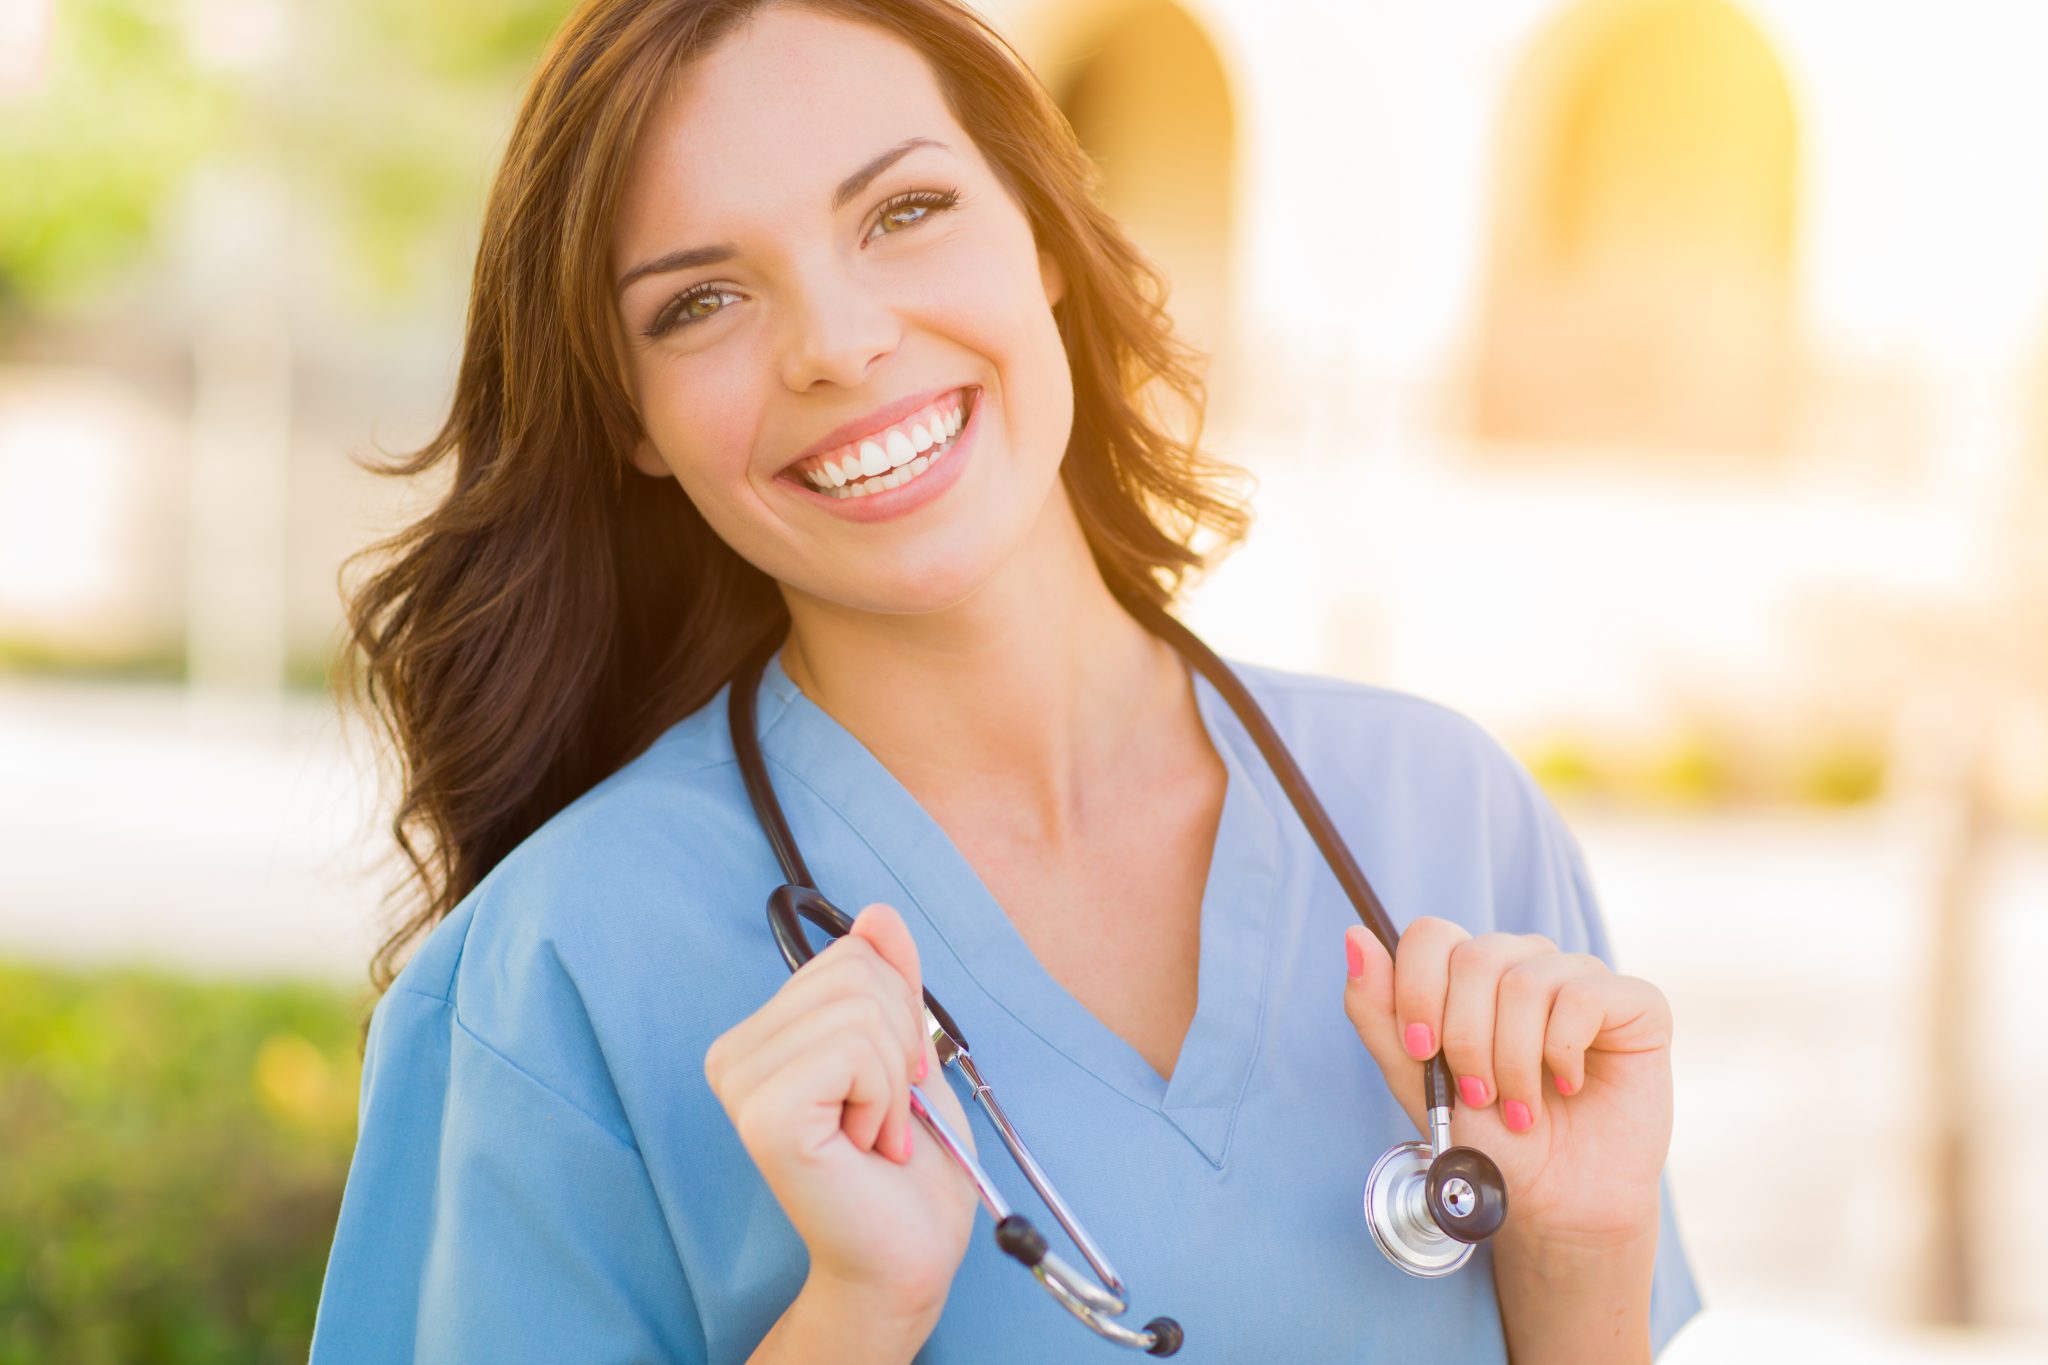 Medical assistant smiling with stethoscope around her neck